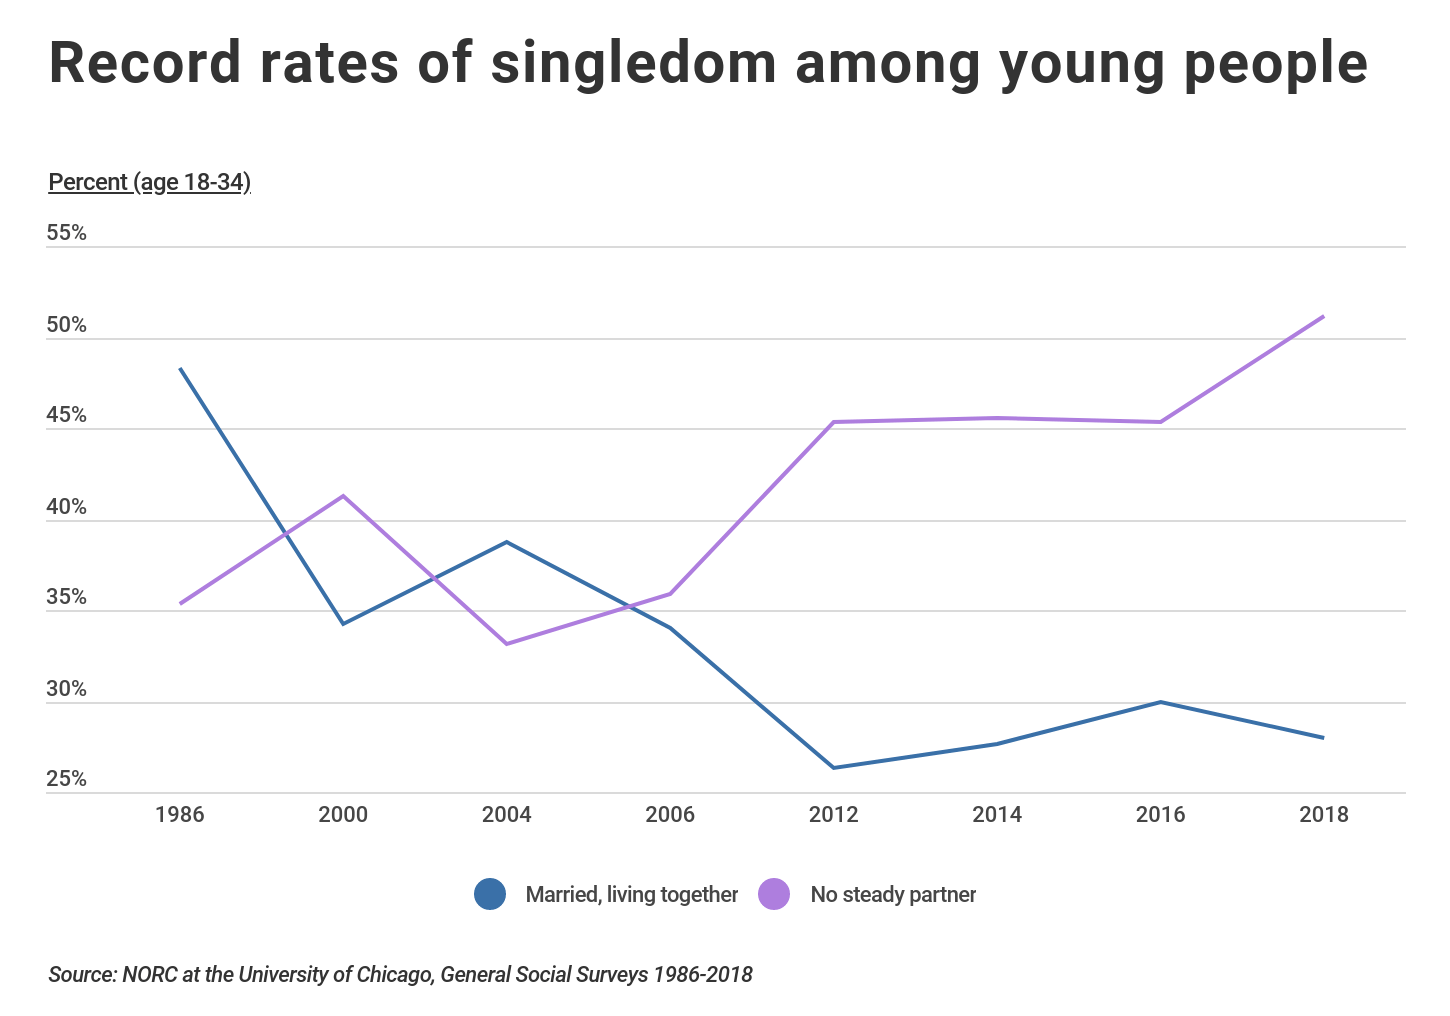 Chart showing rates of the single population over the years